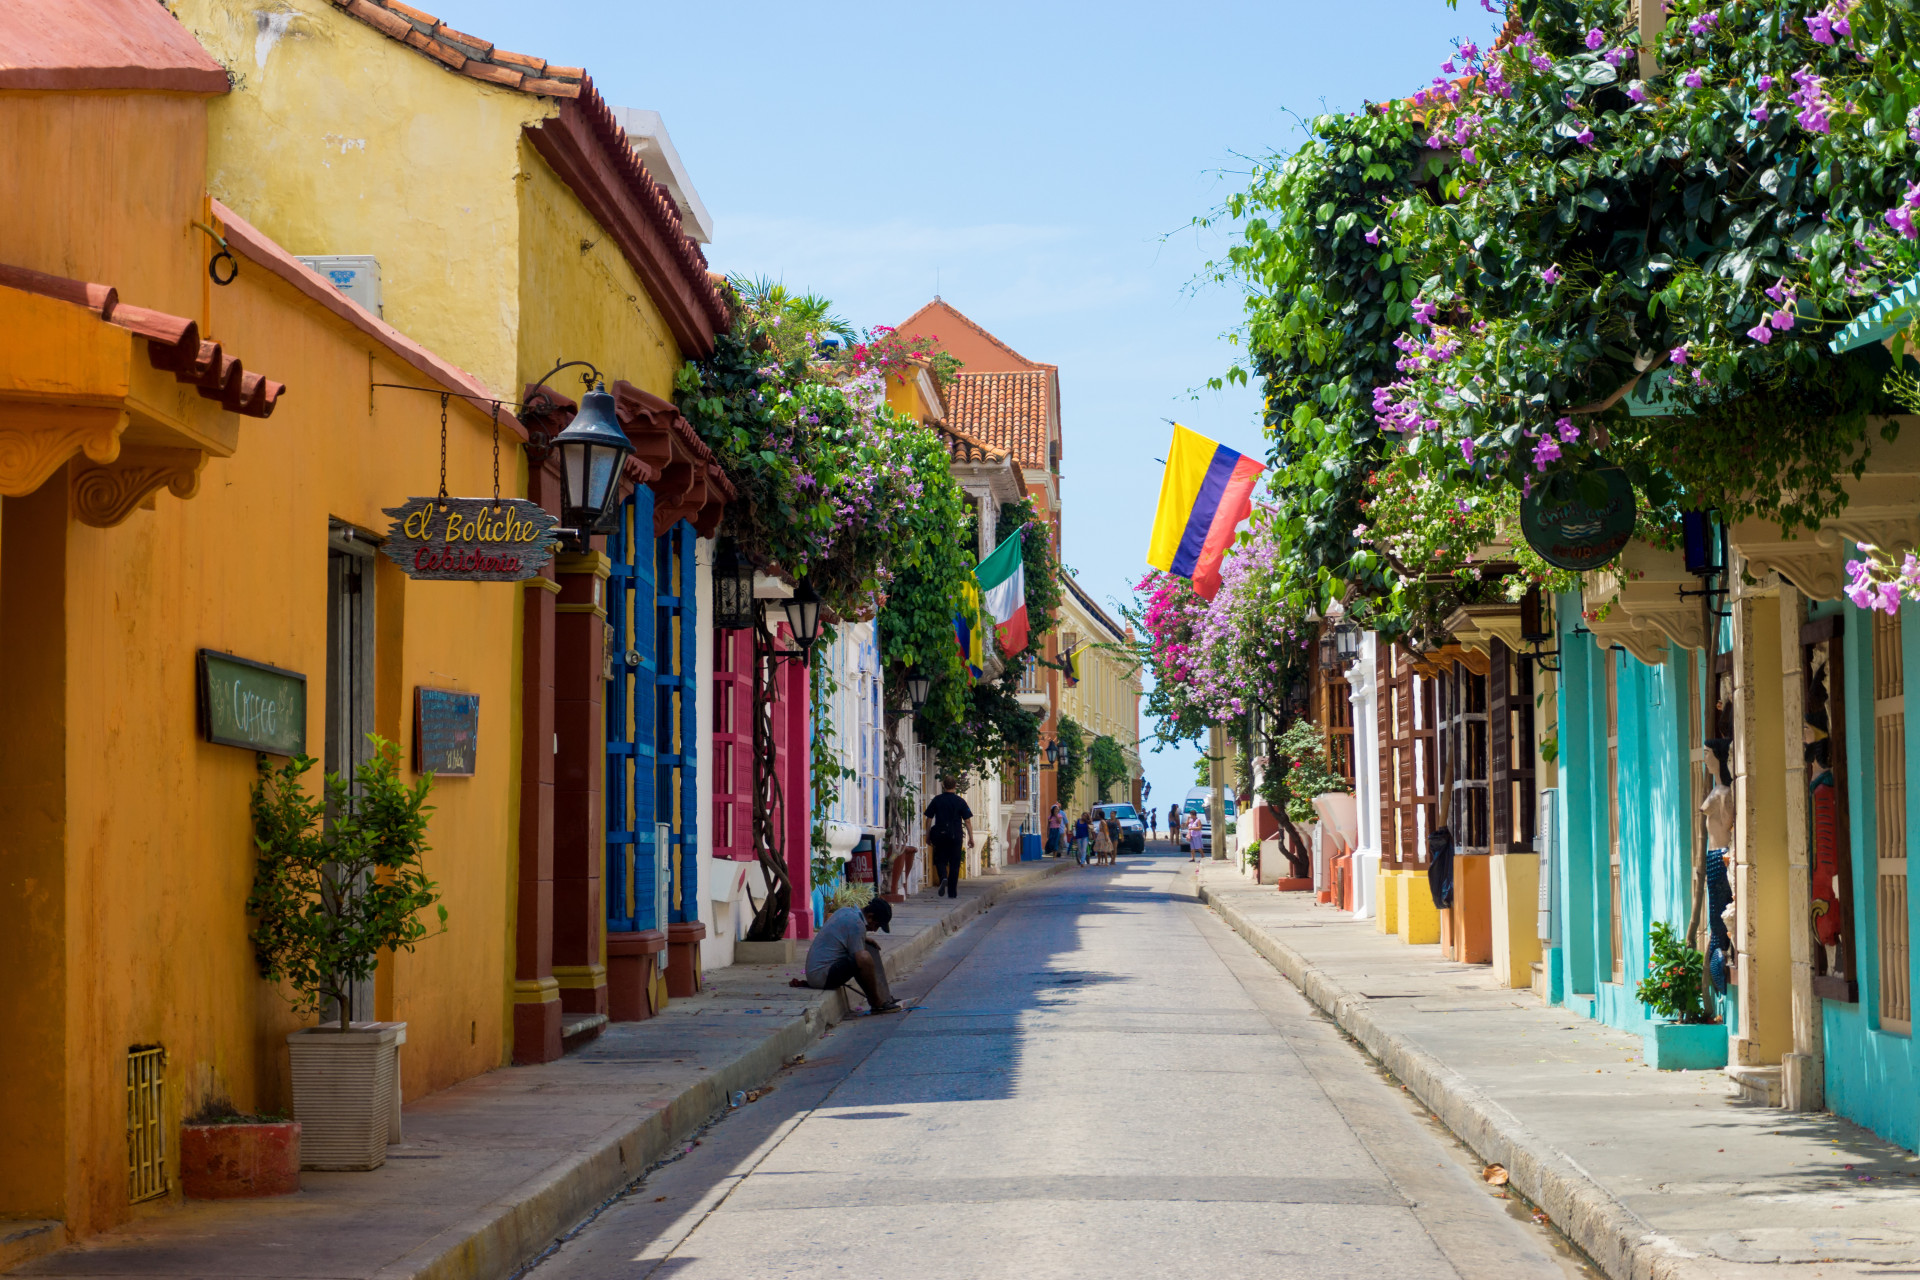 This Colombian city includes both a modern and old section, the latter of which is surrounded by walls. You may recognize the streets full of charming colorful houses—a great area for stroll.<p><a href="https://www.msn.com/en-sg/community/channel/vid-7xx8mnucu55yw63we9va2gwr7uihbxwc68fxqp25x6tg4ftibpra?cvid=94631541bc0f4f89bfd59158d696ad7e">Follow us and access great exclusive content every day</a></p>